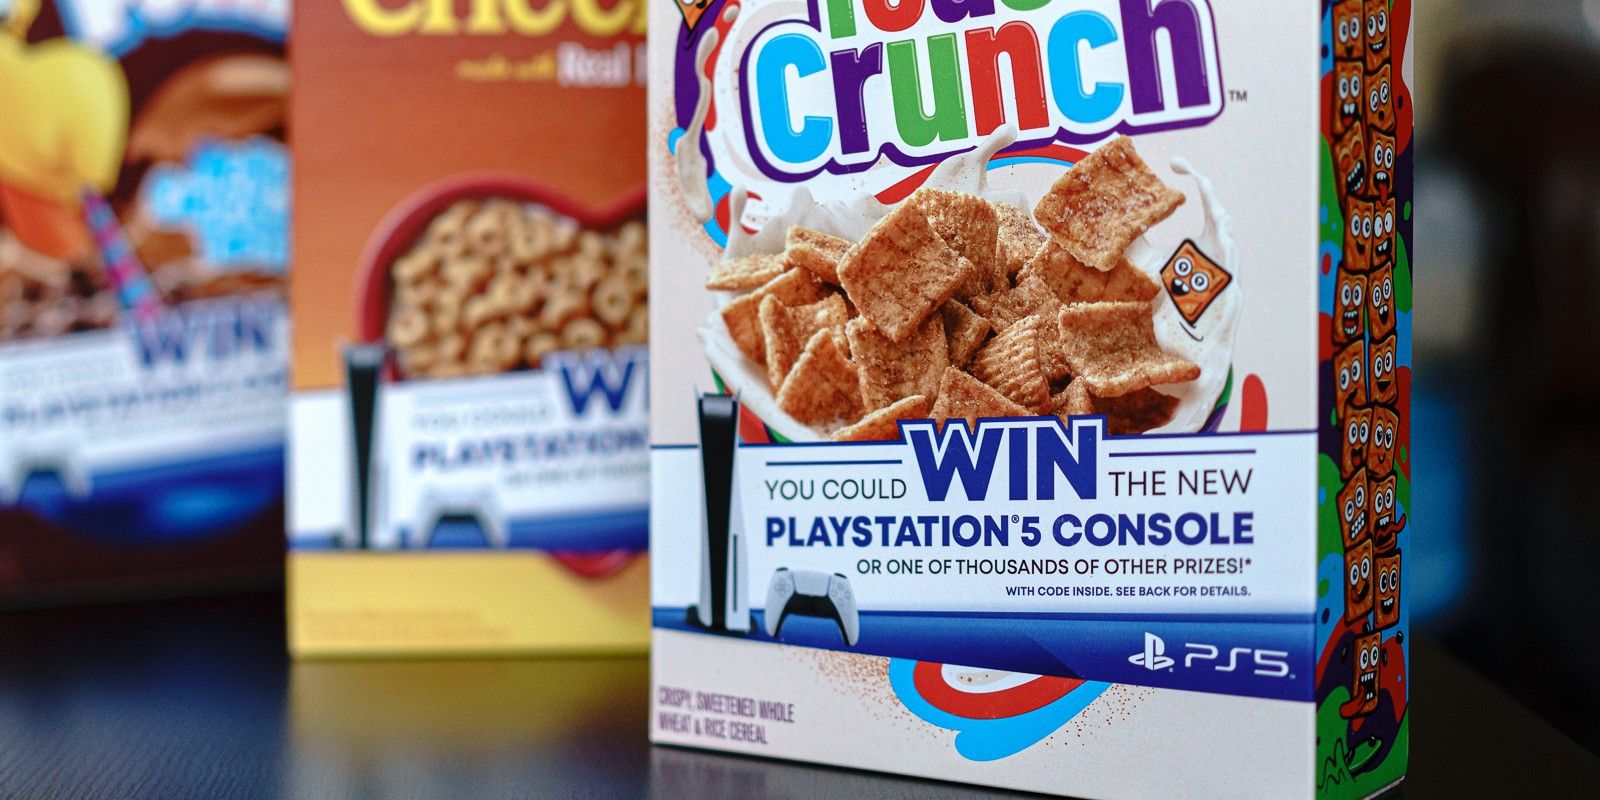 PlayStation 5 Sweepstakes Cereal Boxes